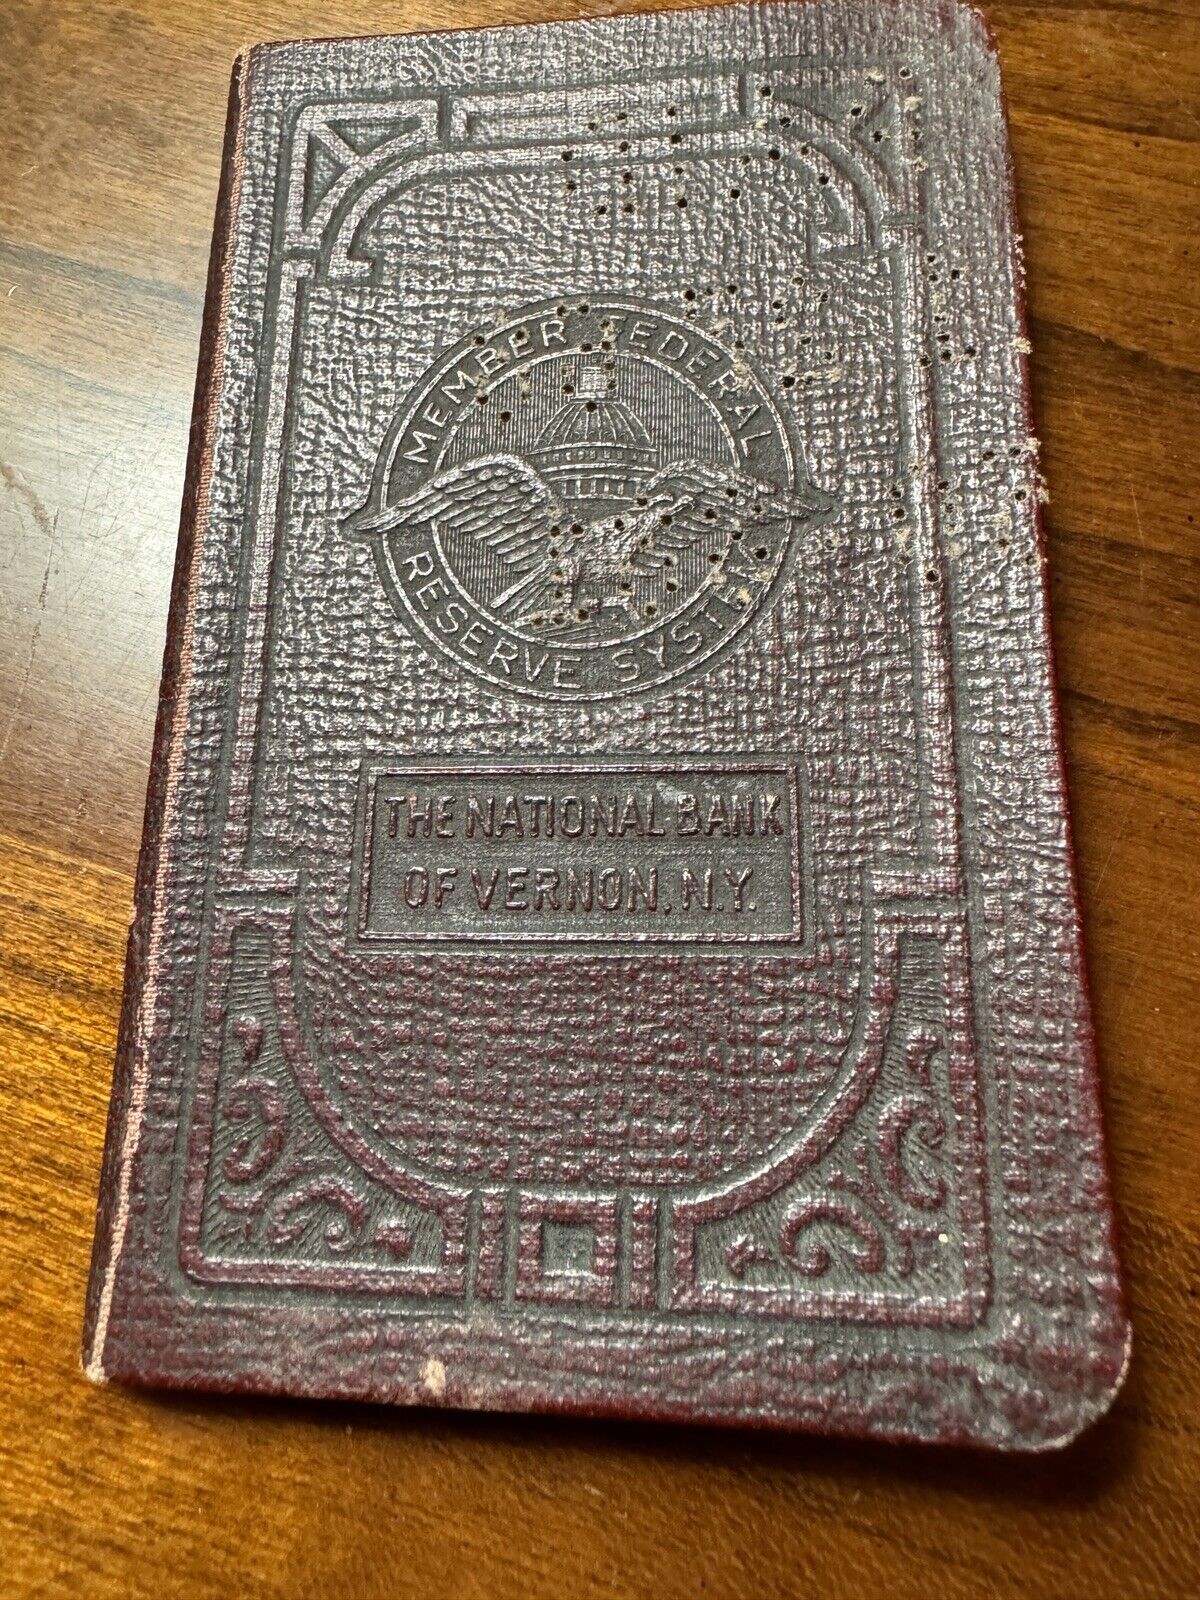 1952 National Bank Of Vernon, Ny Account Passbook Vintage Leather Book